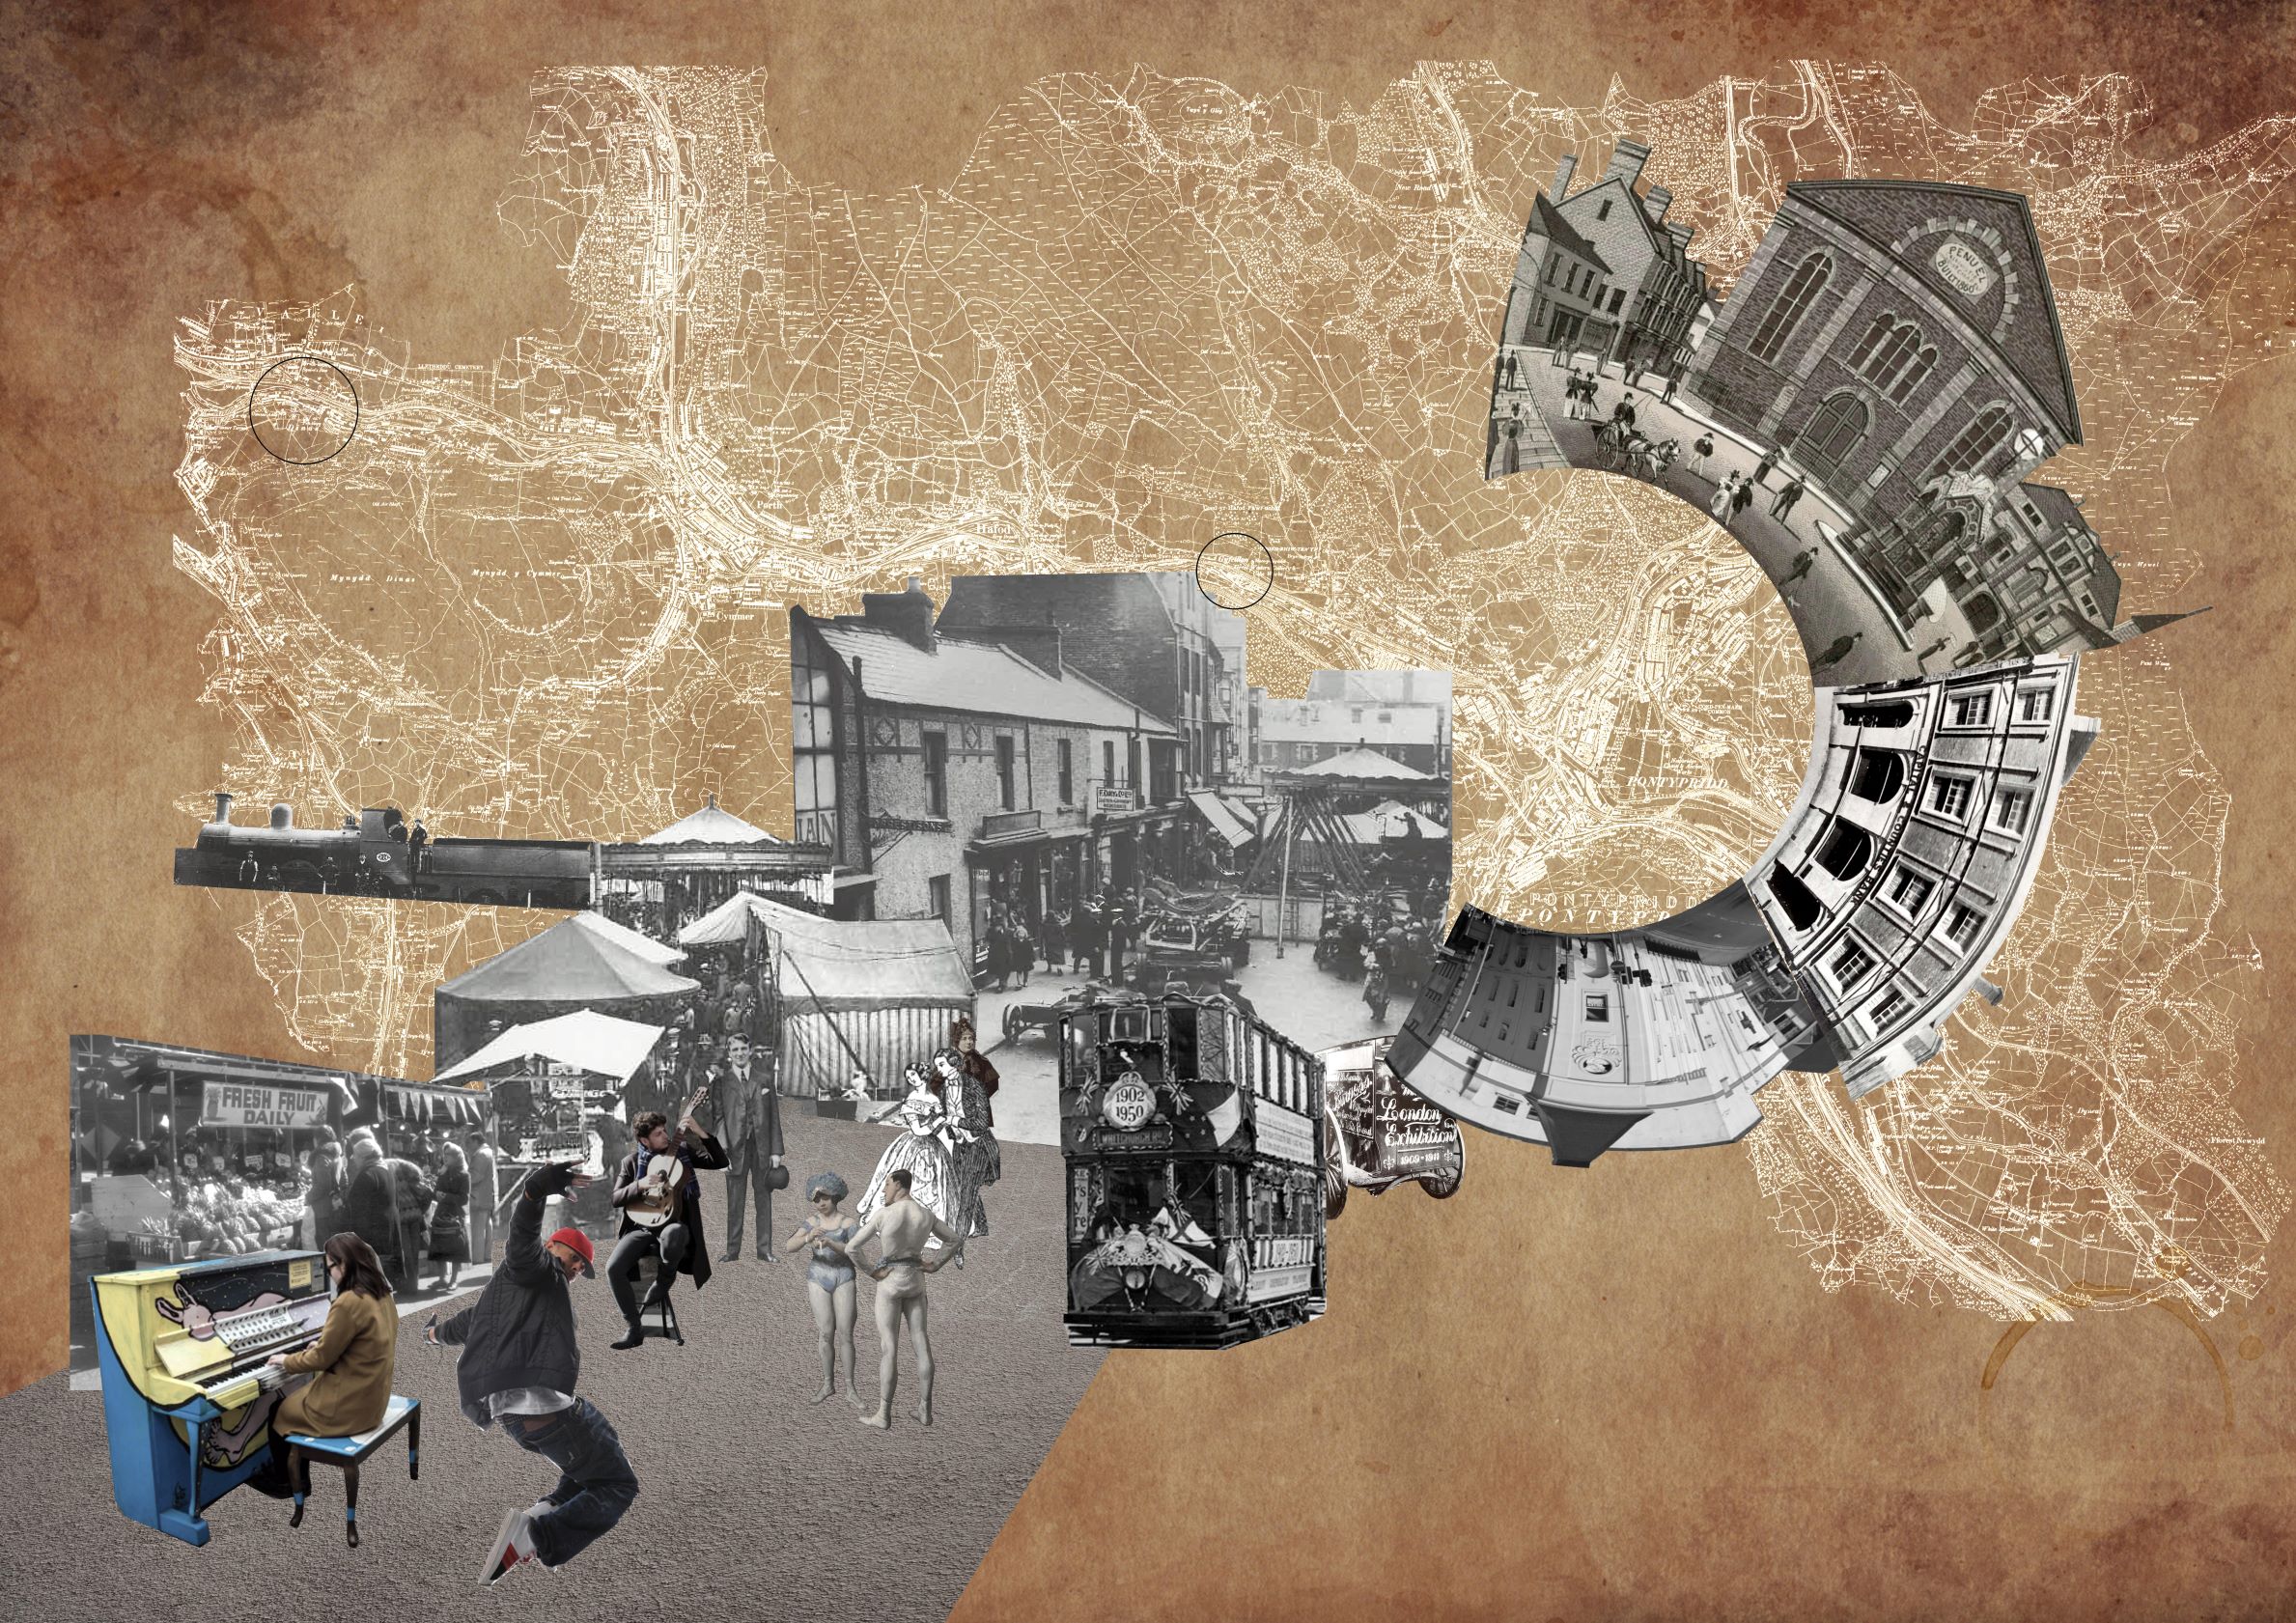 Image of an abstract collage encapsulating the spirit of Pontypridd by Nok Leung